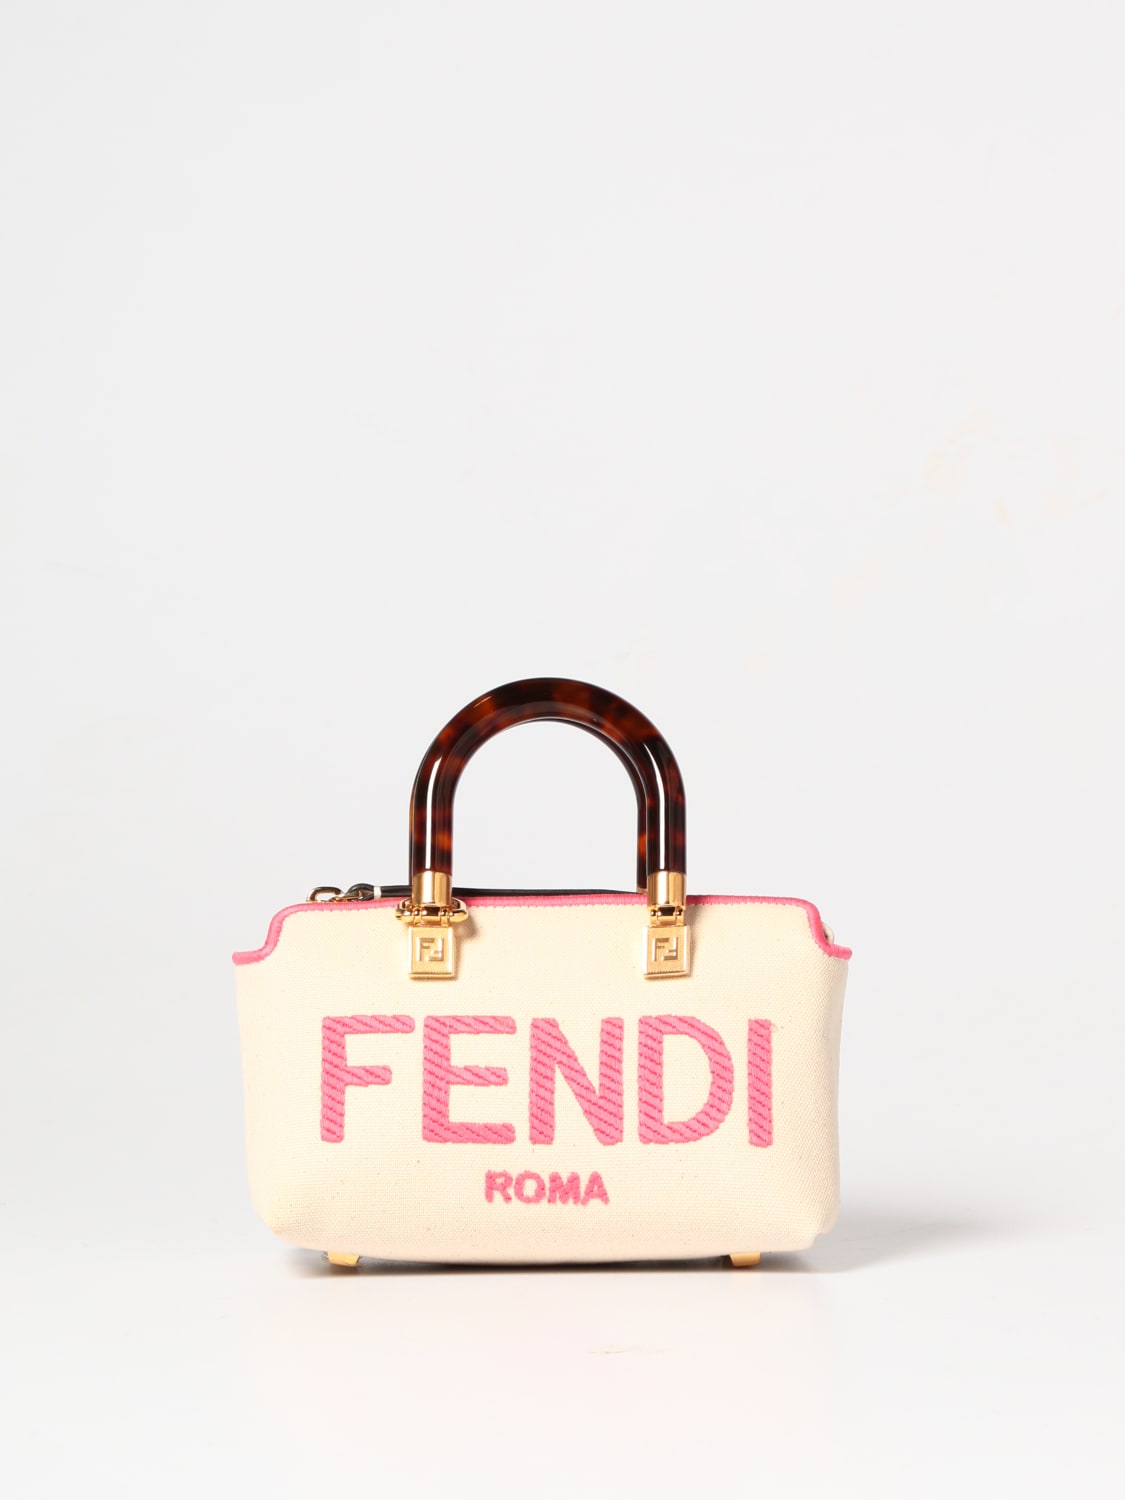 FENDI: Mini By The Way bag in canvas embroidered logo - Pink | Fendi mini bag 8BS067ANVG online at GIGLIO.COM